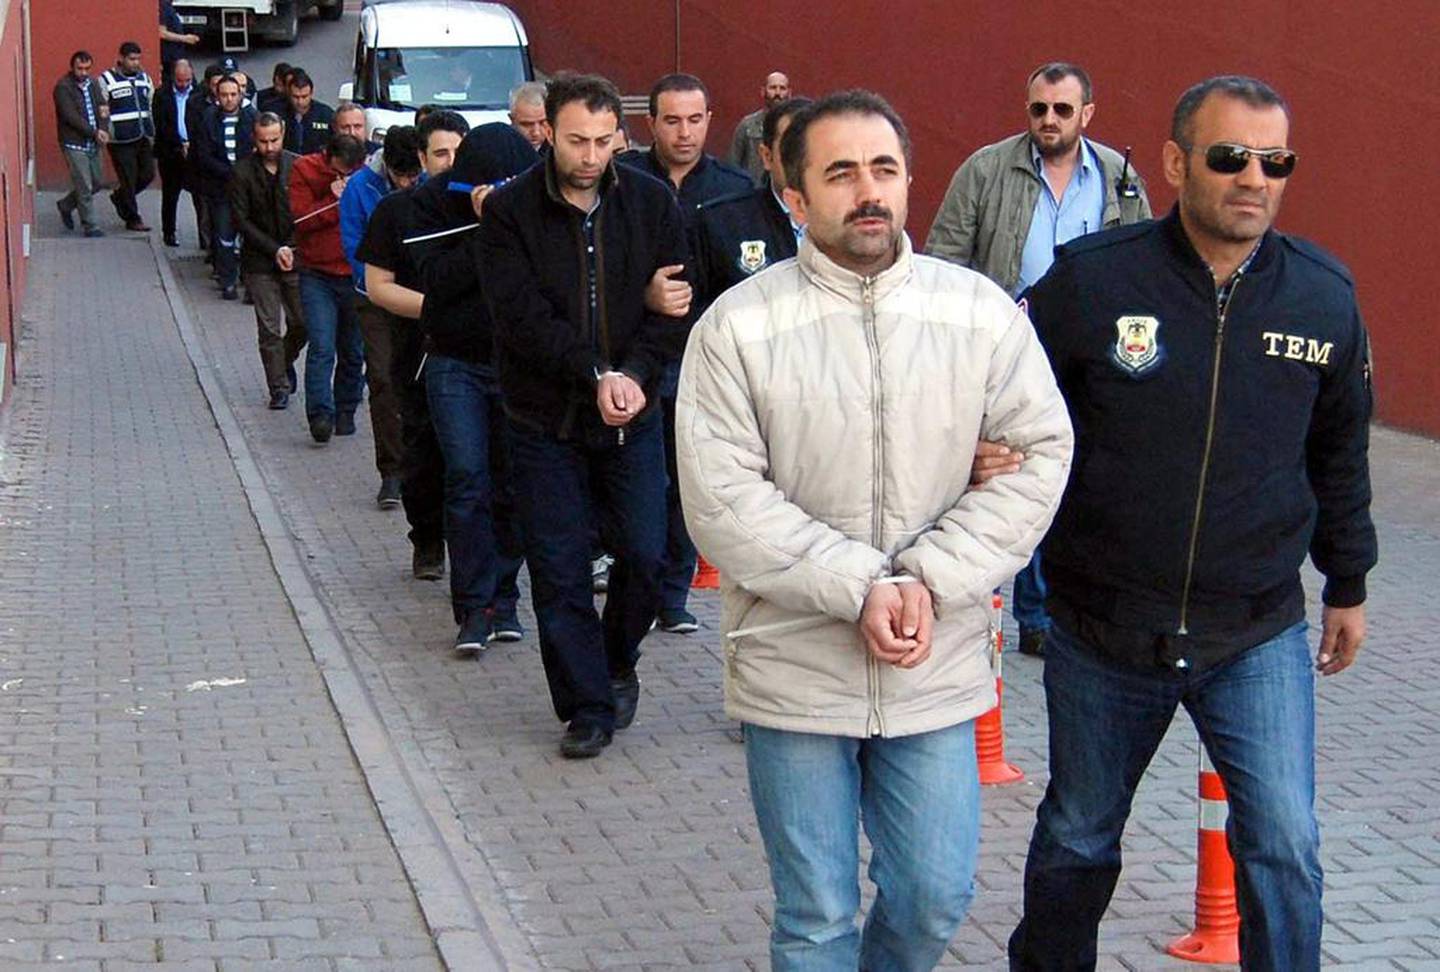 Turkish police escort suspects of the Gulen movement in the Turkish city of Kayseri in 2017, months after a failed coup attempt. EPA